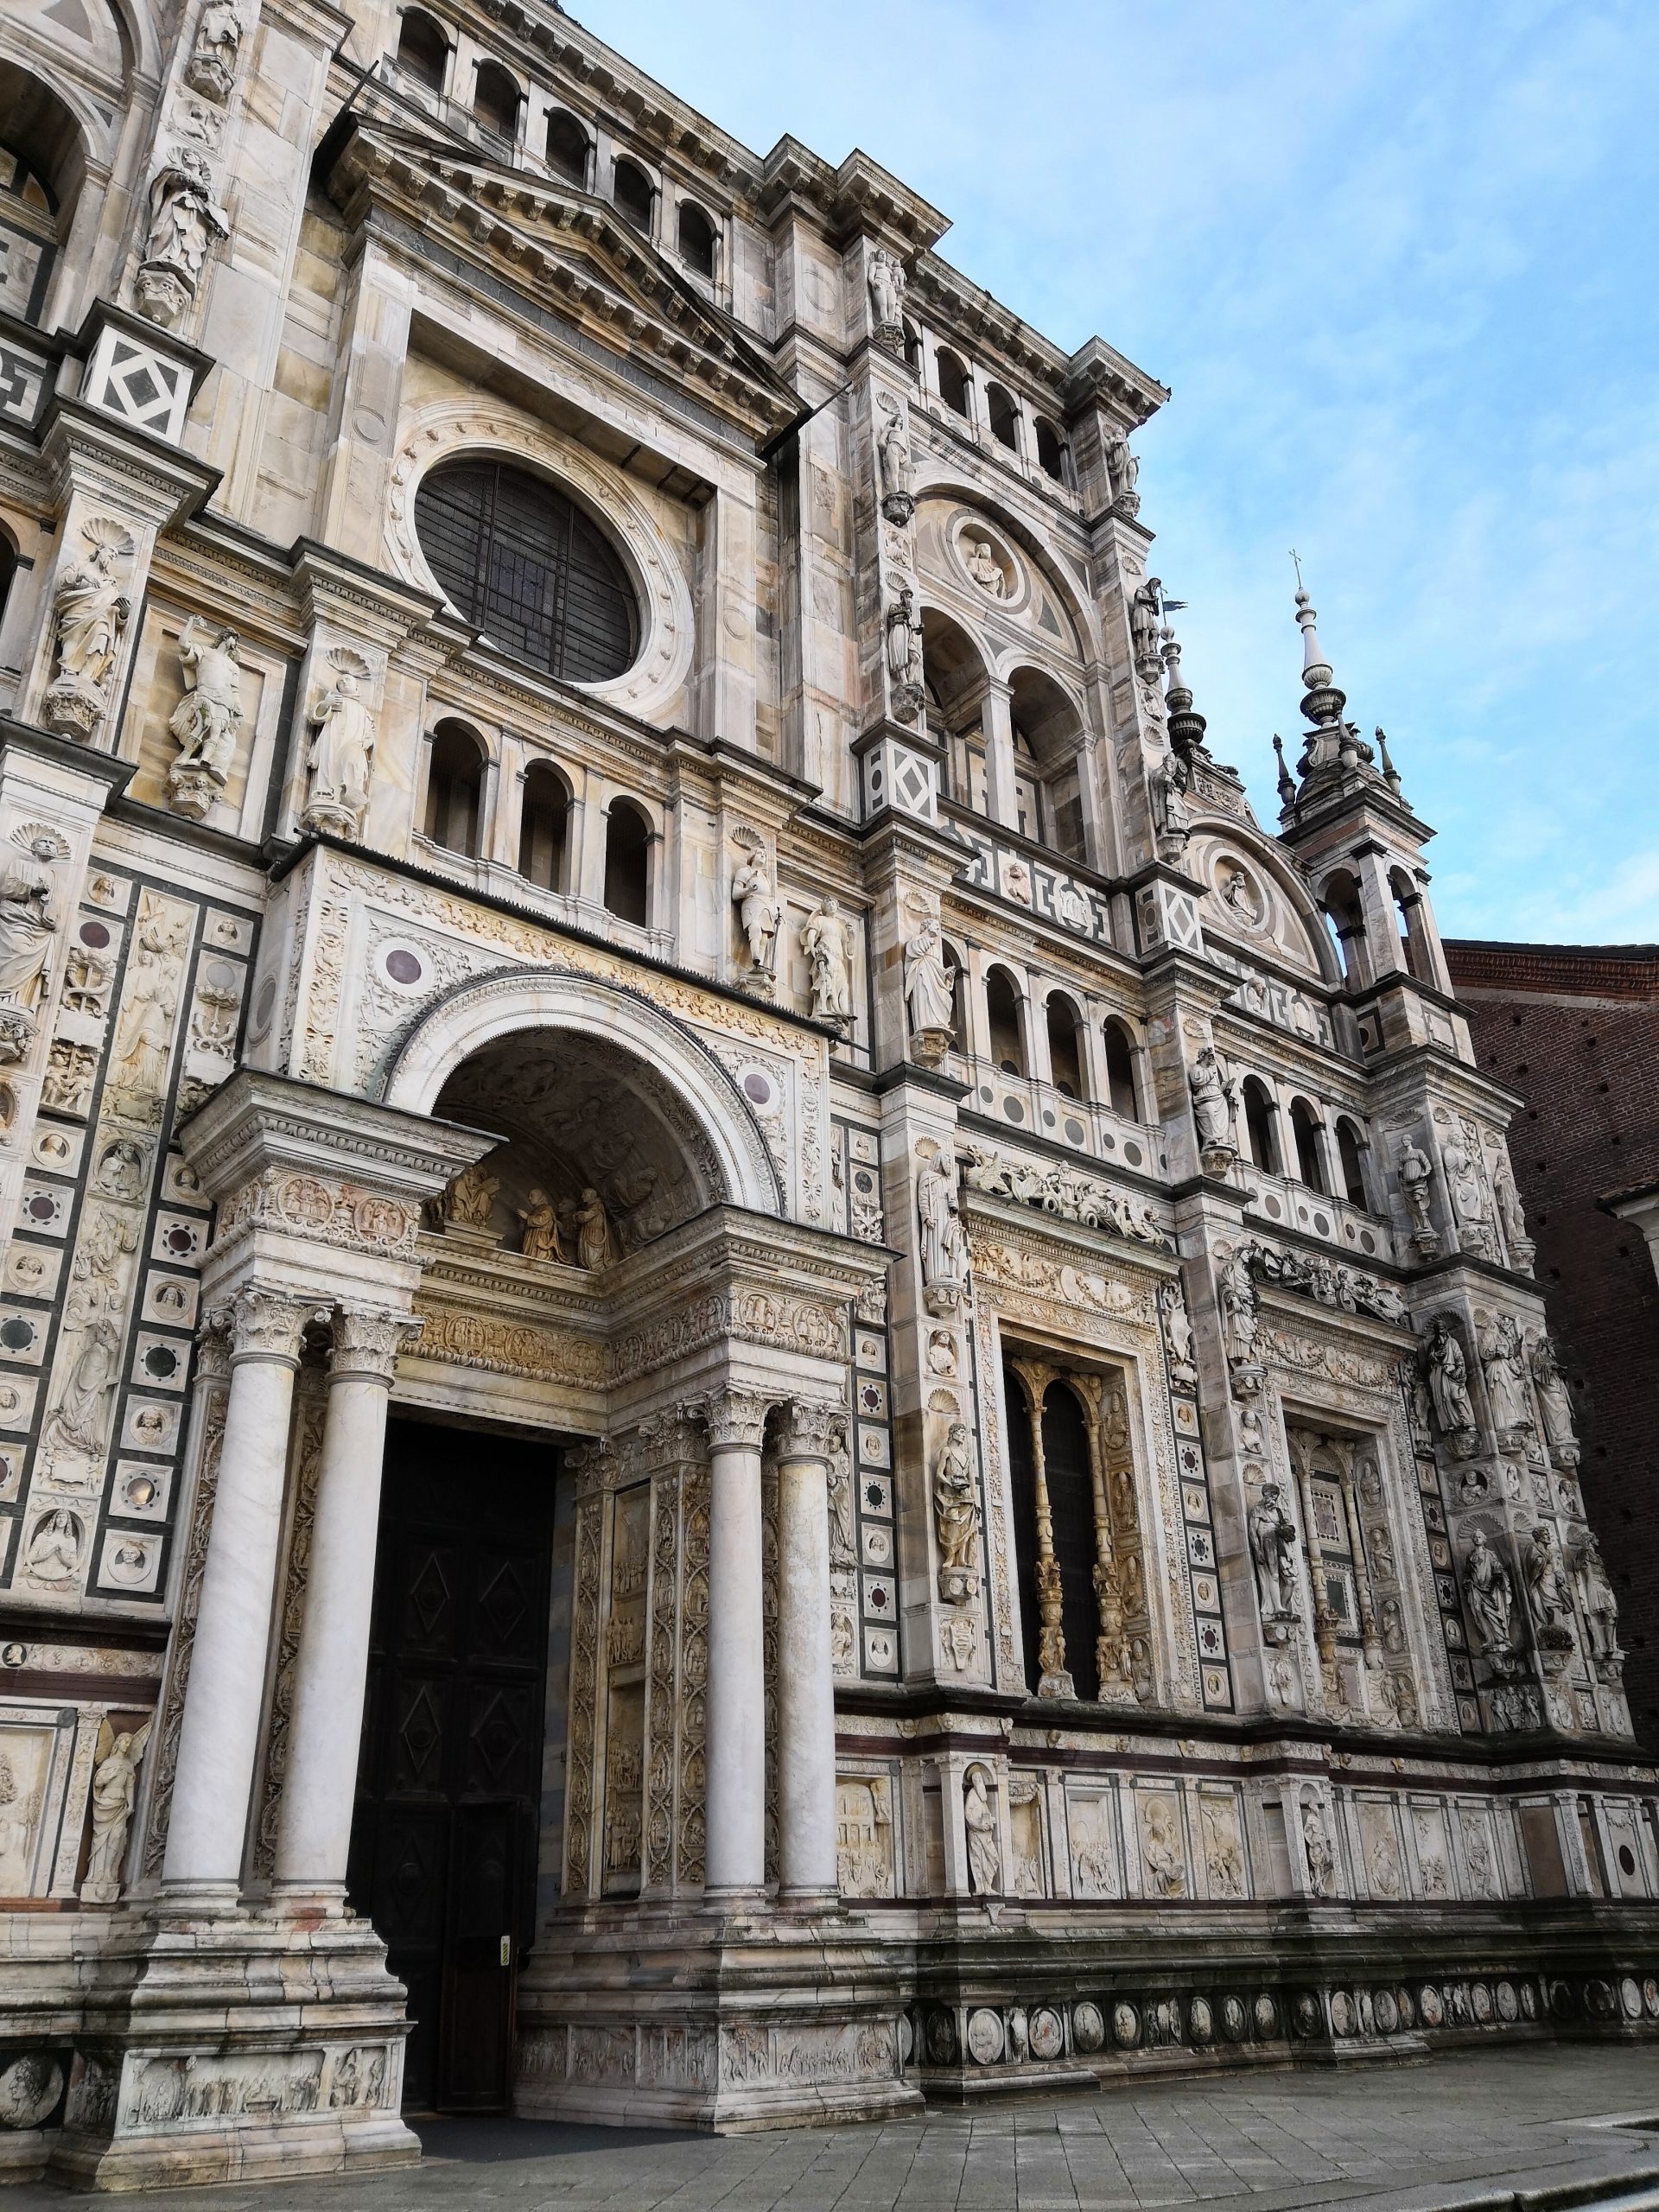 Enjoy the architecture in Pavia by taking a day trip from Milan